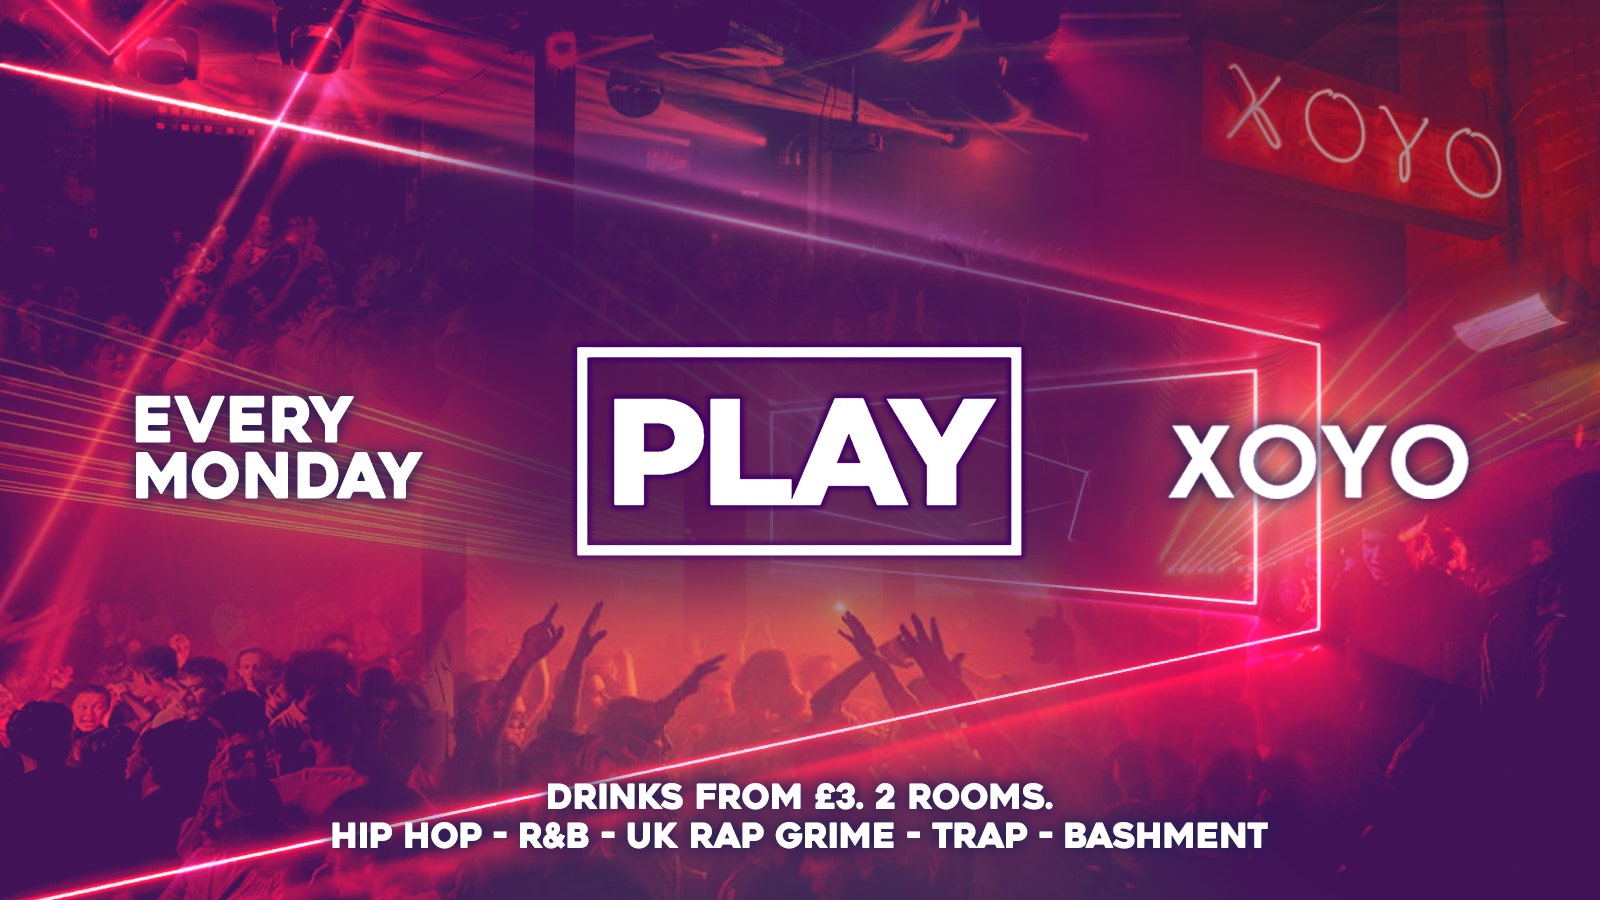 Play @ XOYO – The Biggest Weekly Monday Student Night in London! – 4th July 2022 🔥